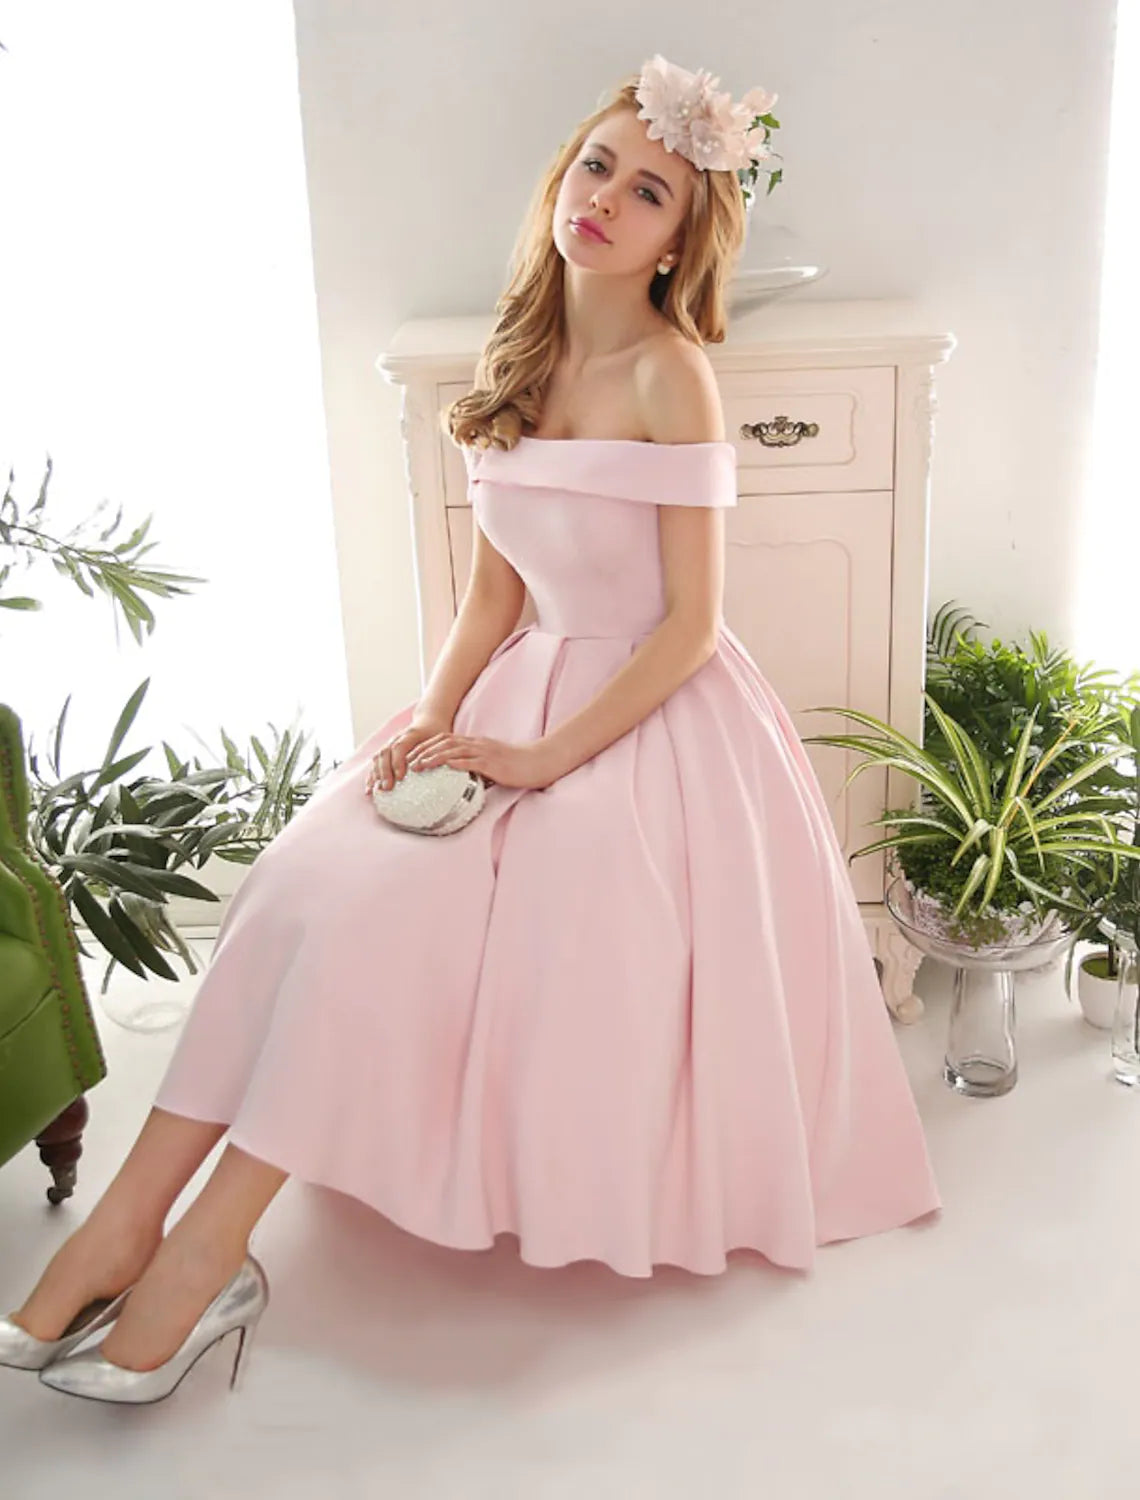 A-Line Cocktail Dresses Vintage Dress Engagement Sleeveless Off Shoulder Stretch Fabric with Pleats